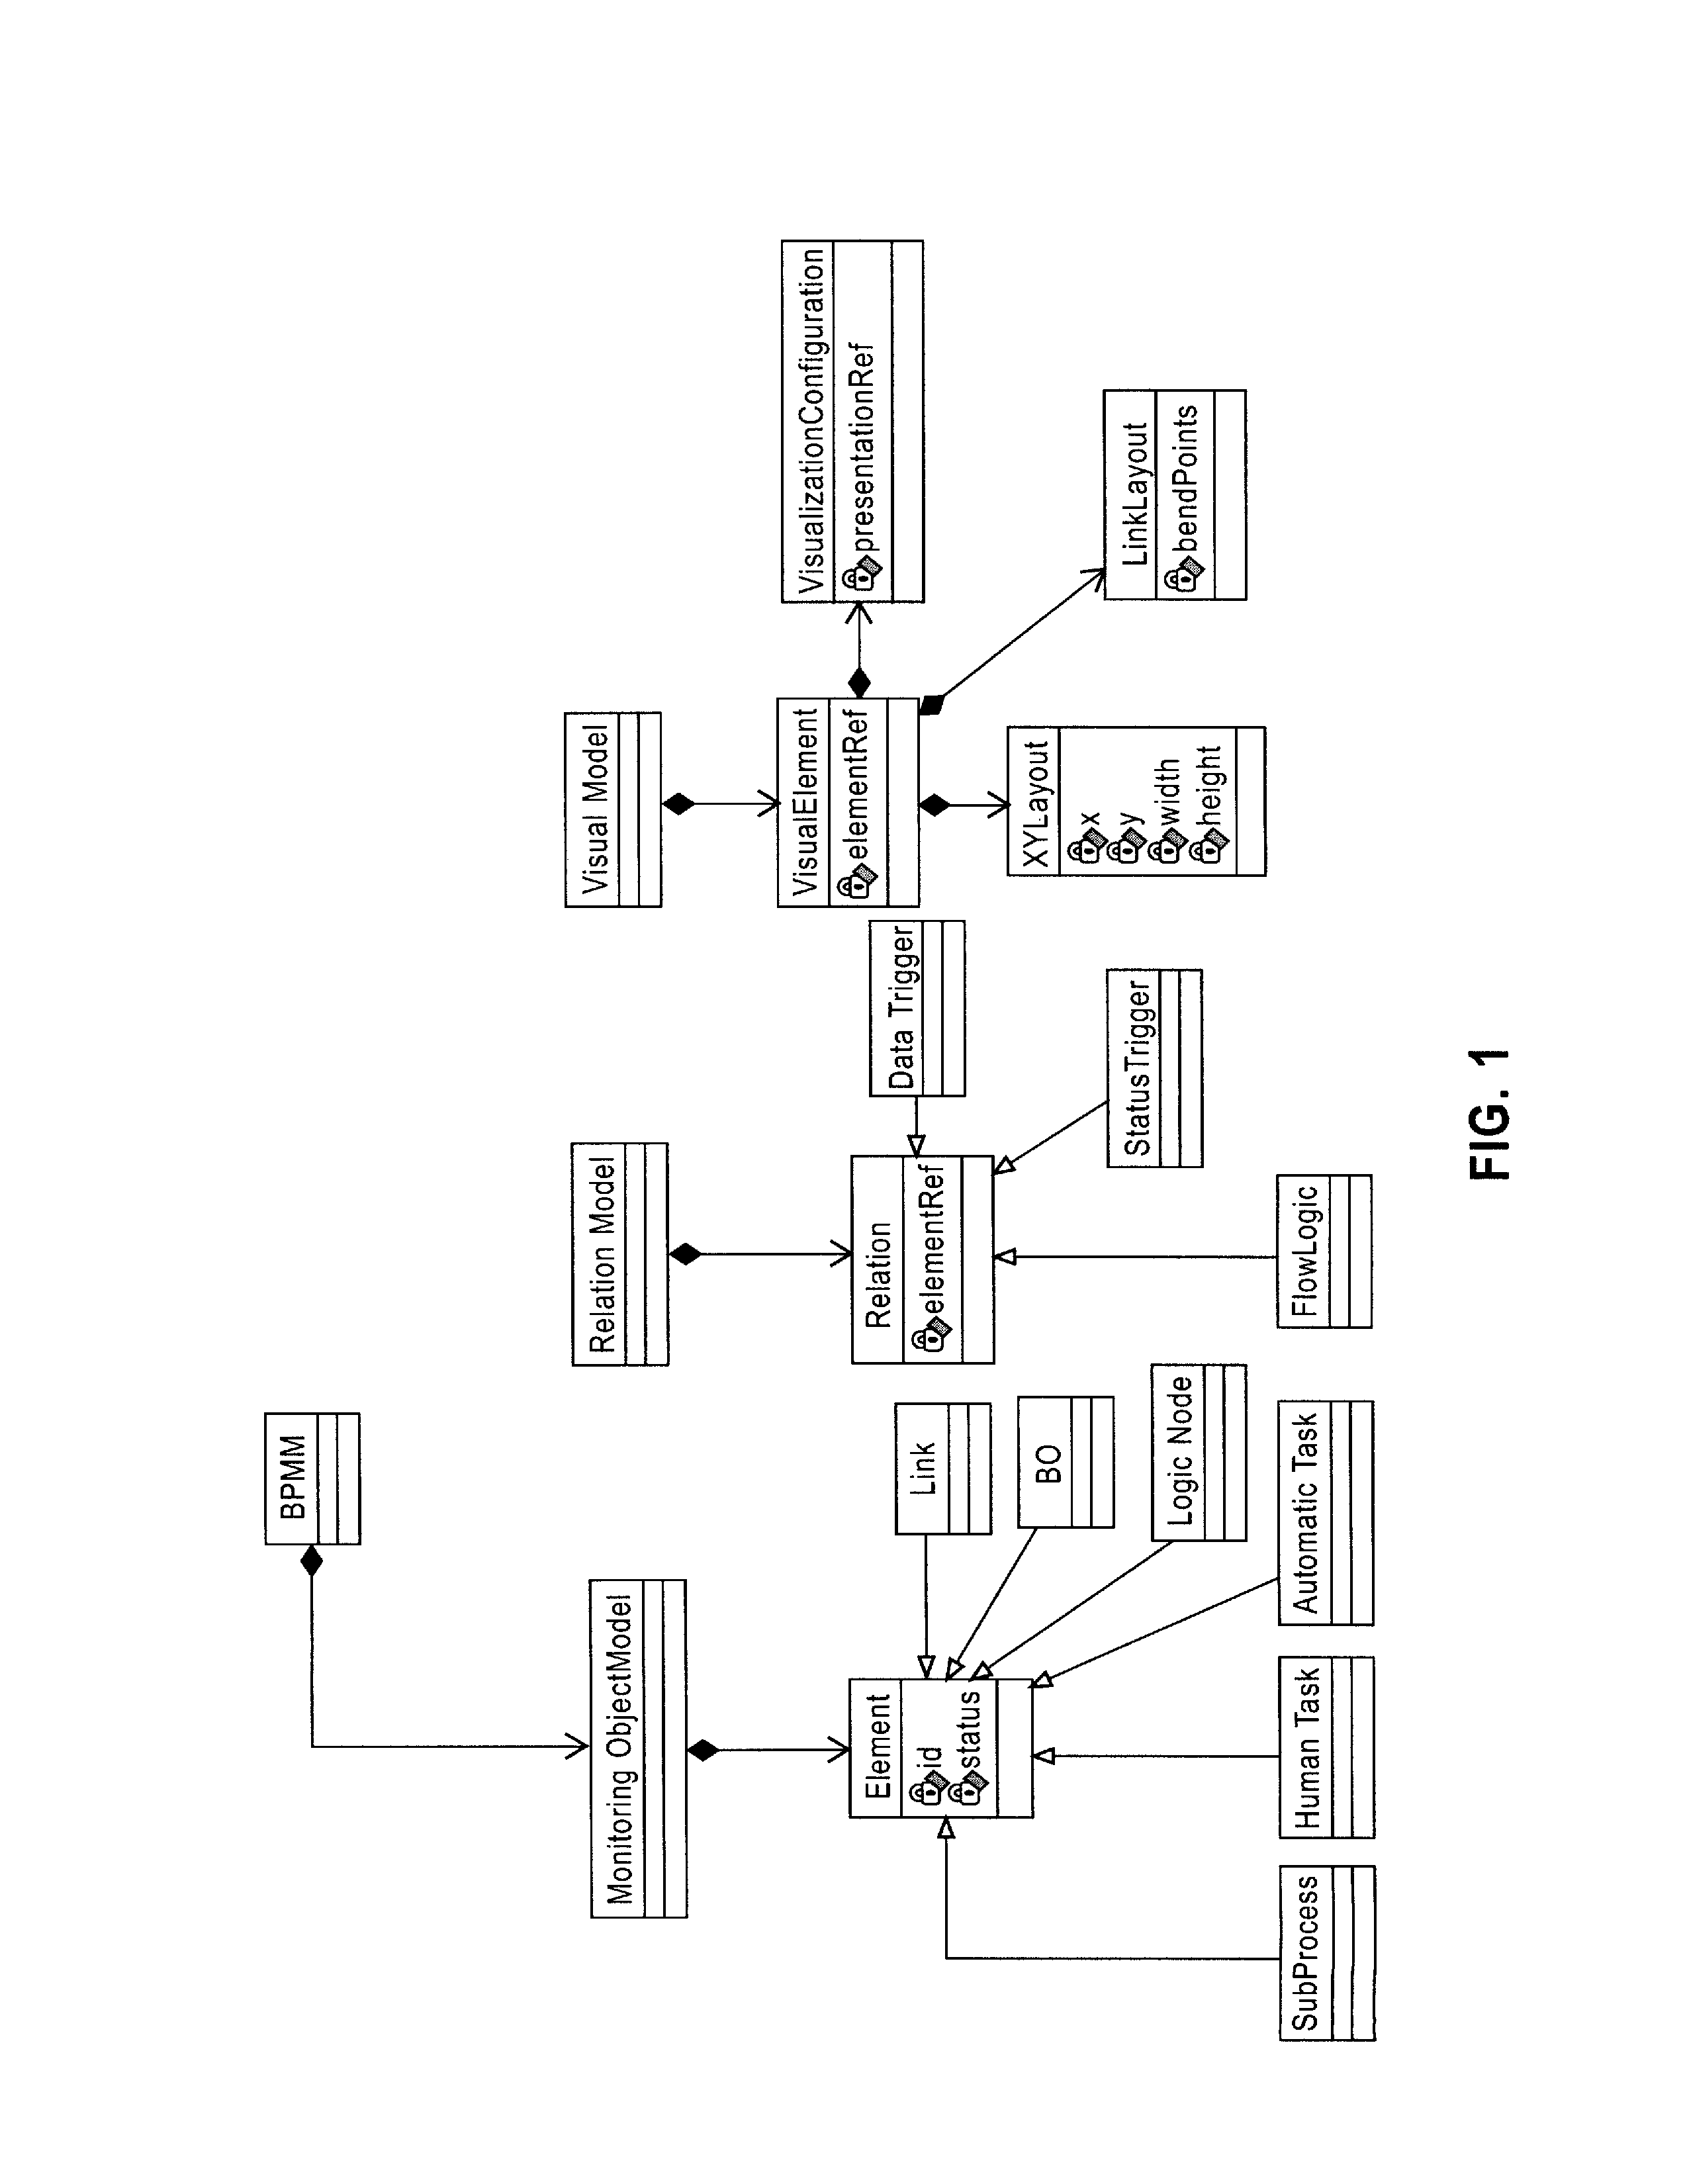 Apparatus and method for generating a monitoring view of an executable business process